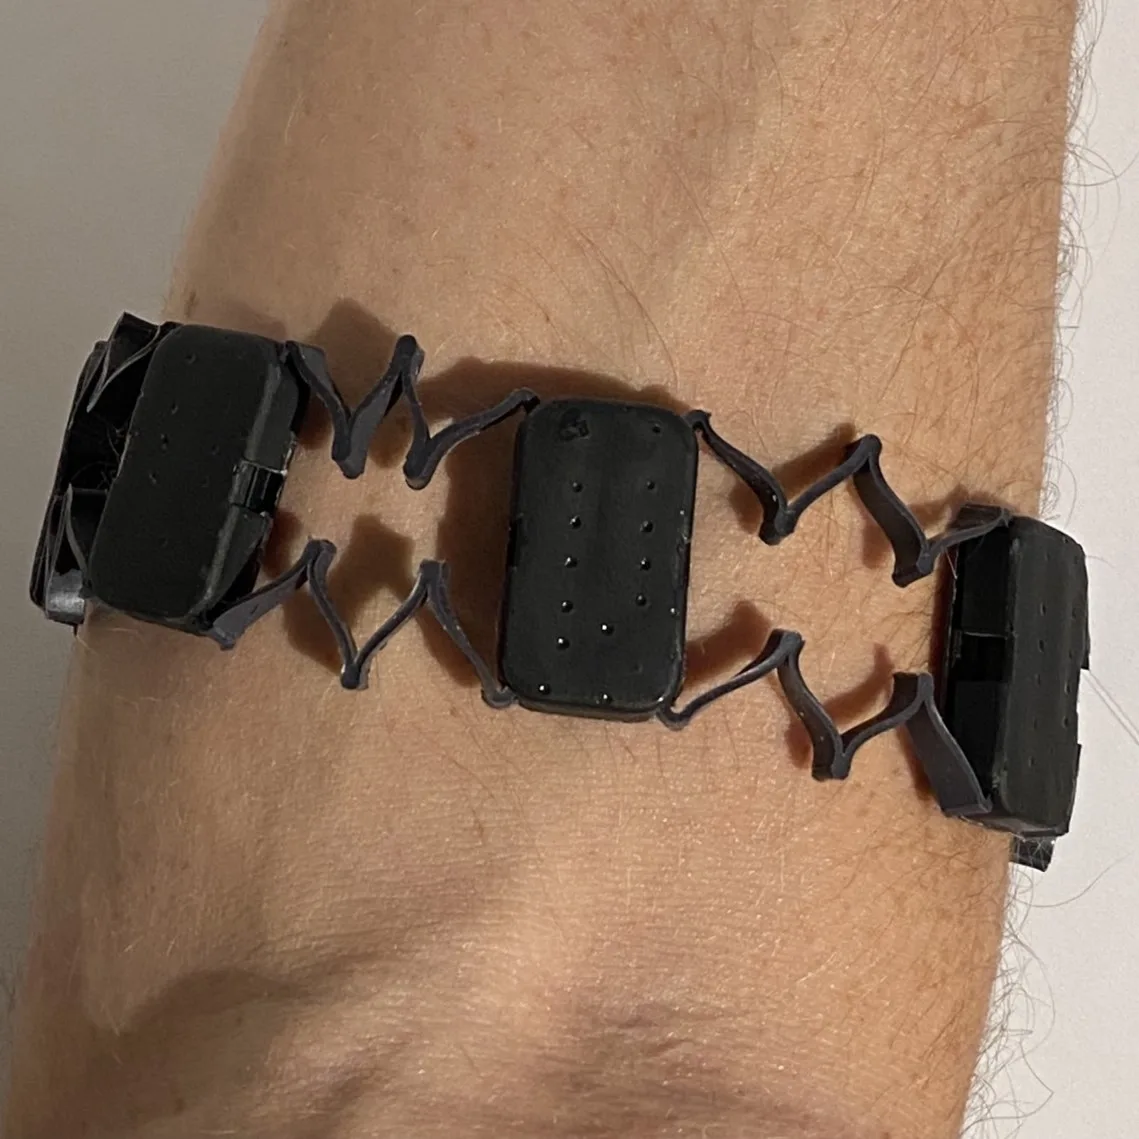 IBT Armband prototype assembled and worn on the forearm